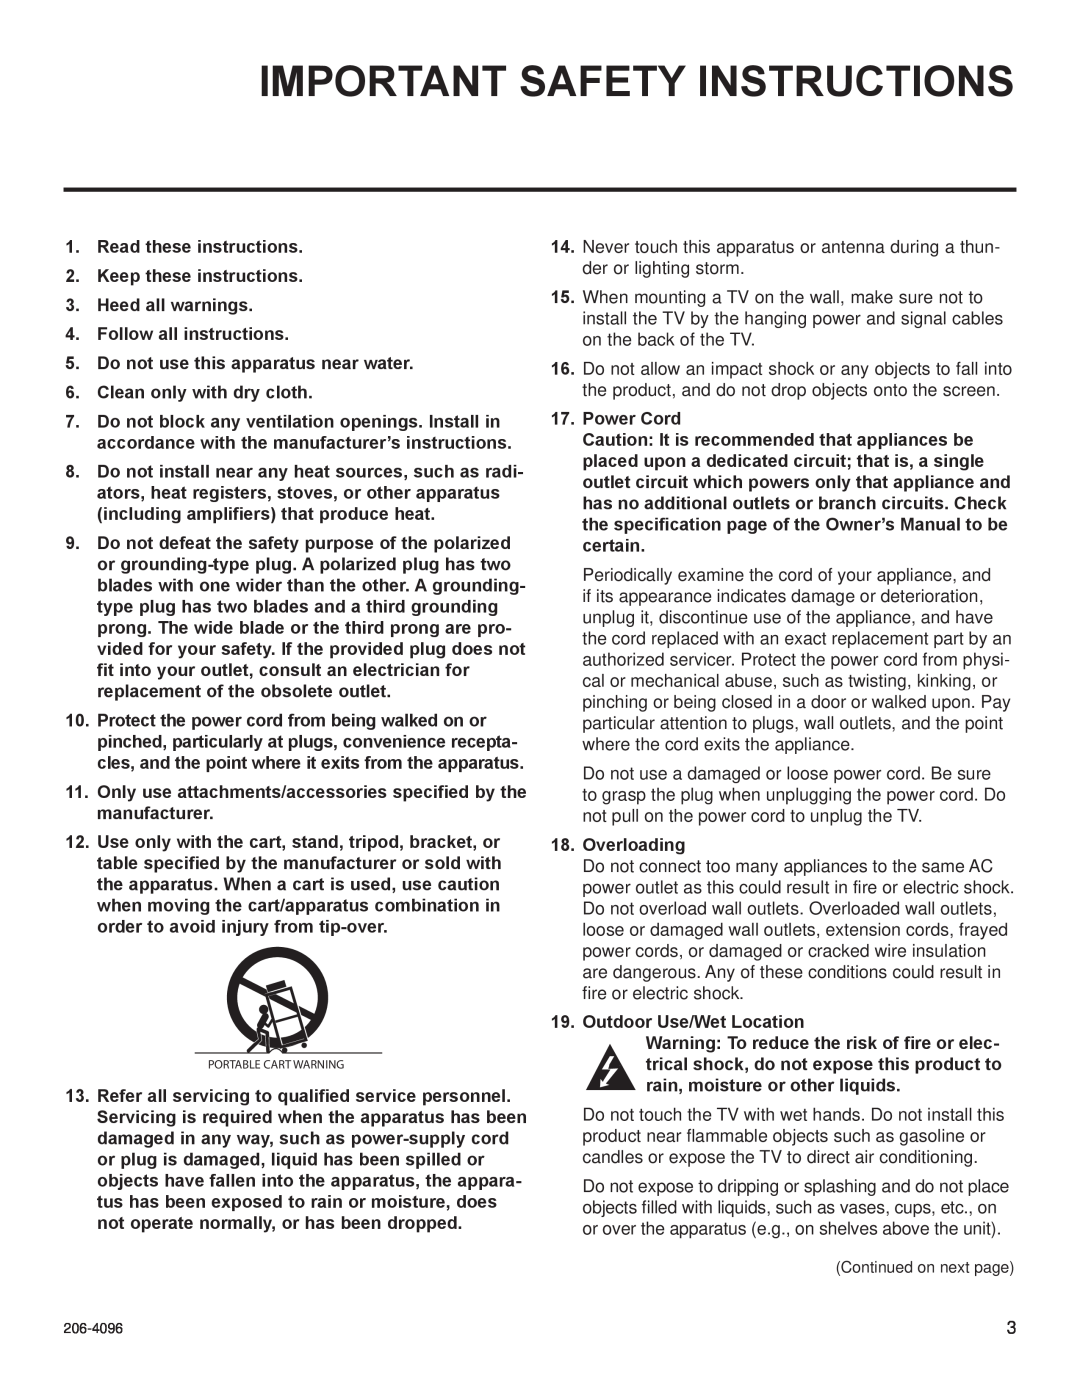 LG Electronics 22LG3DCH Important Safety Instructions, Read these instructions 2. Keep these instructions, Power Cord 